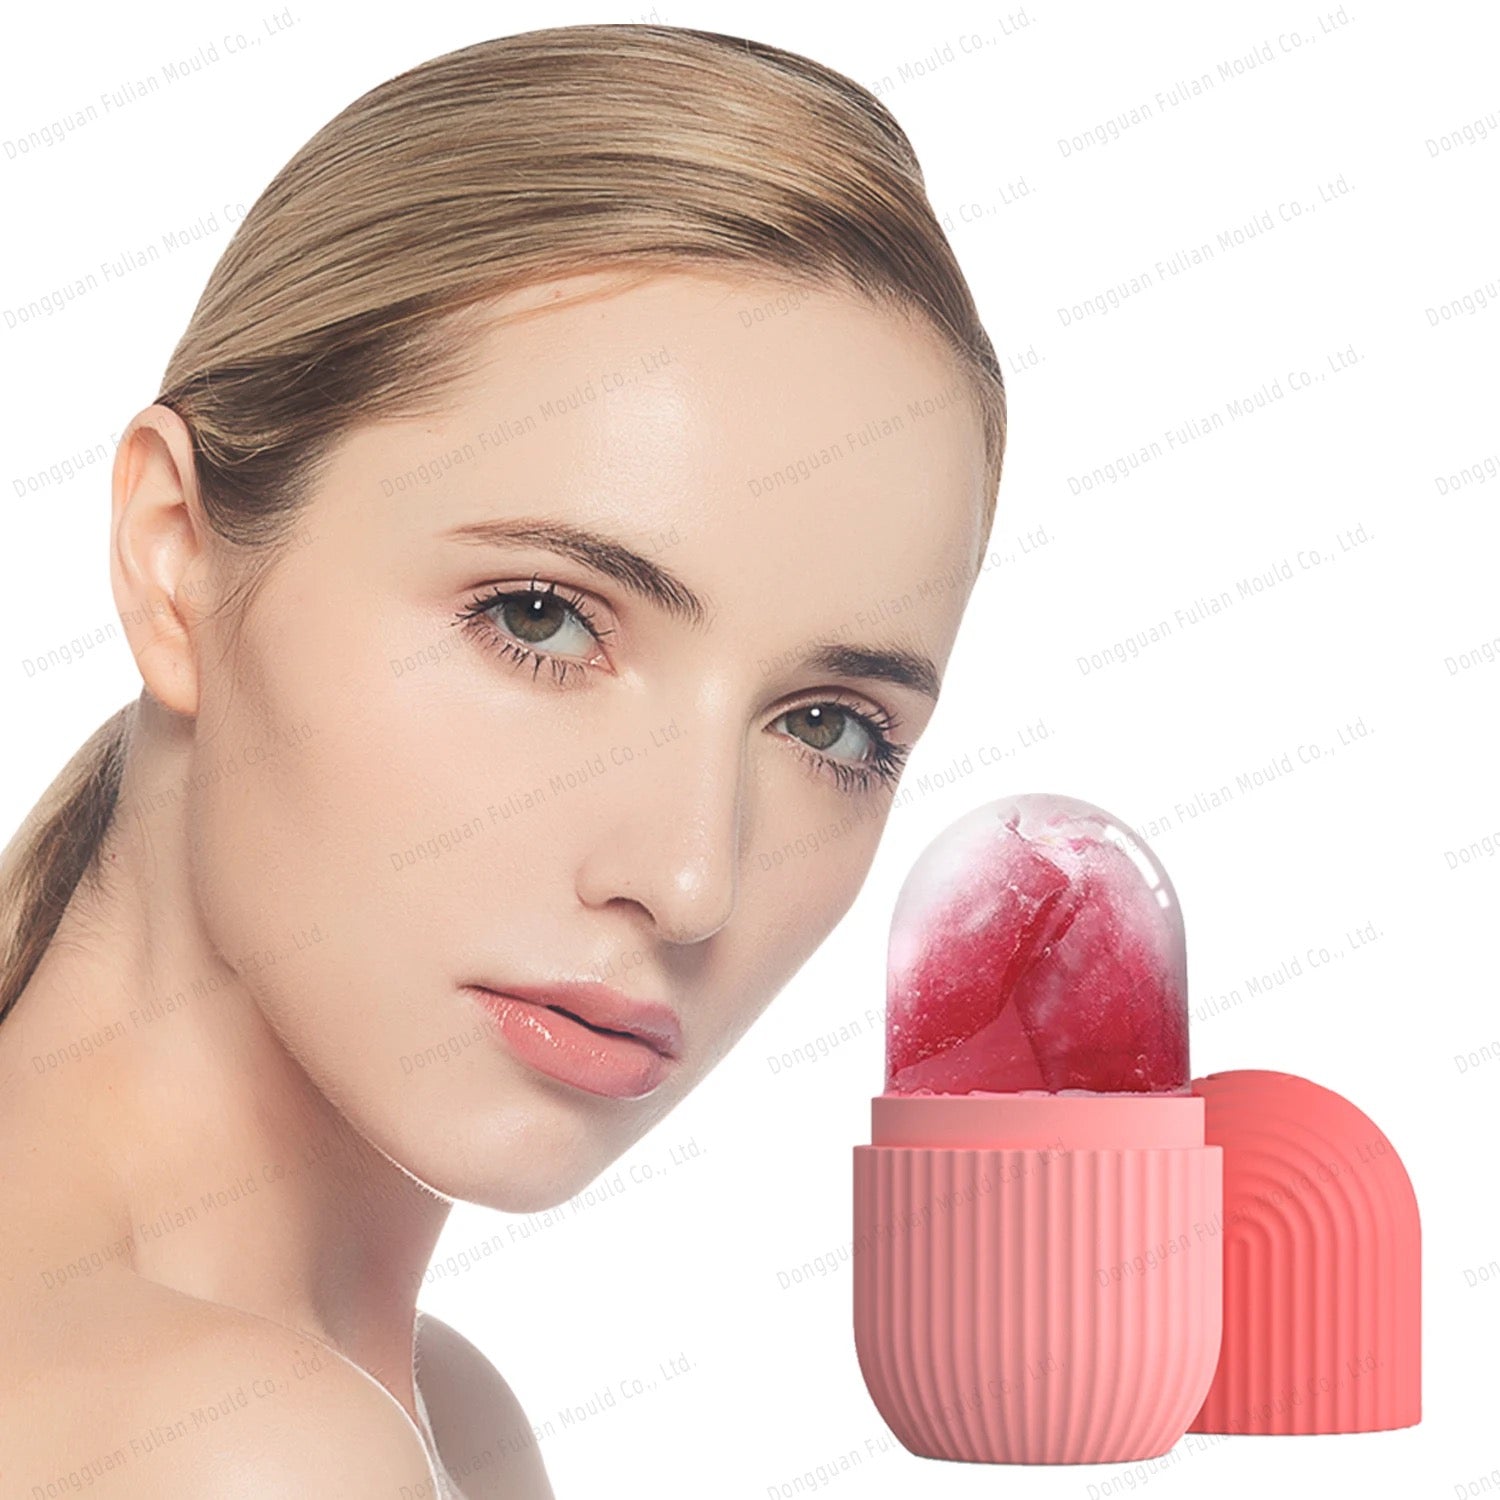 Silicone Ice Roller Massager in pink color next to a woman